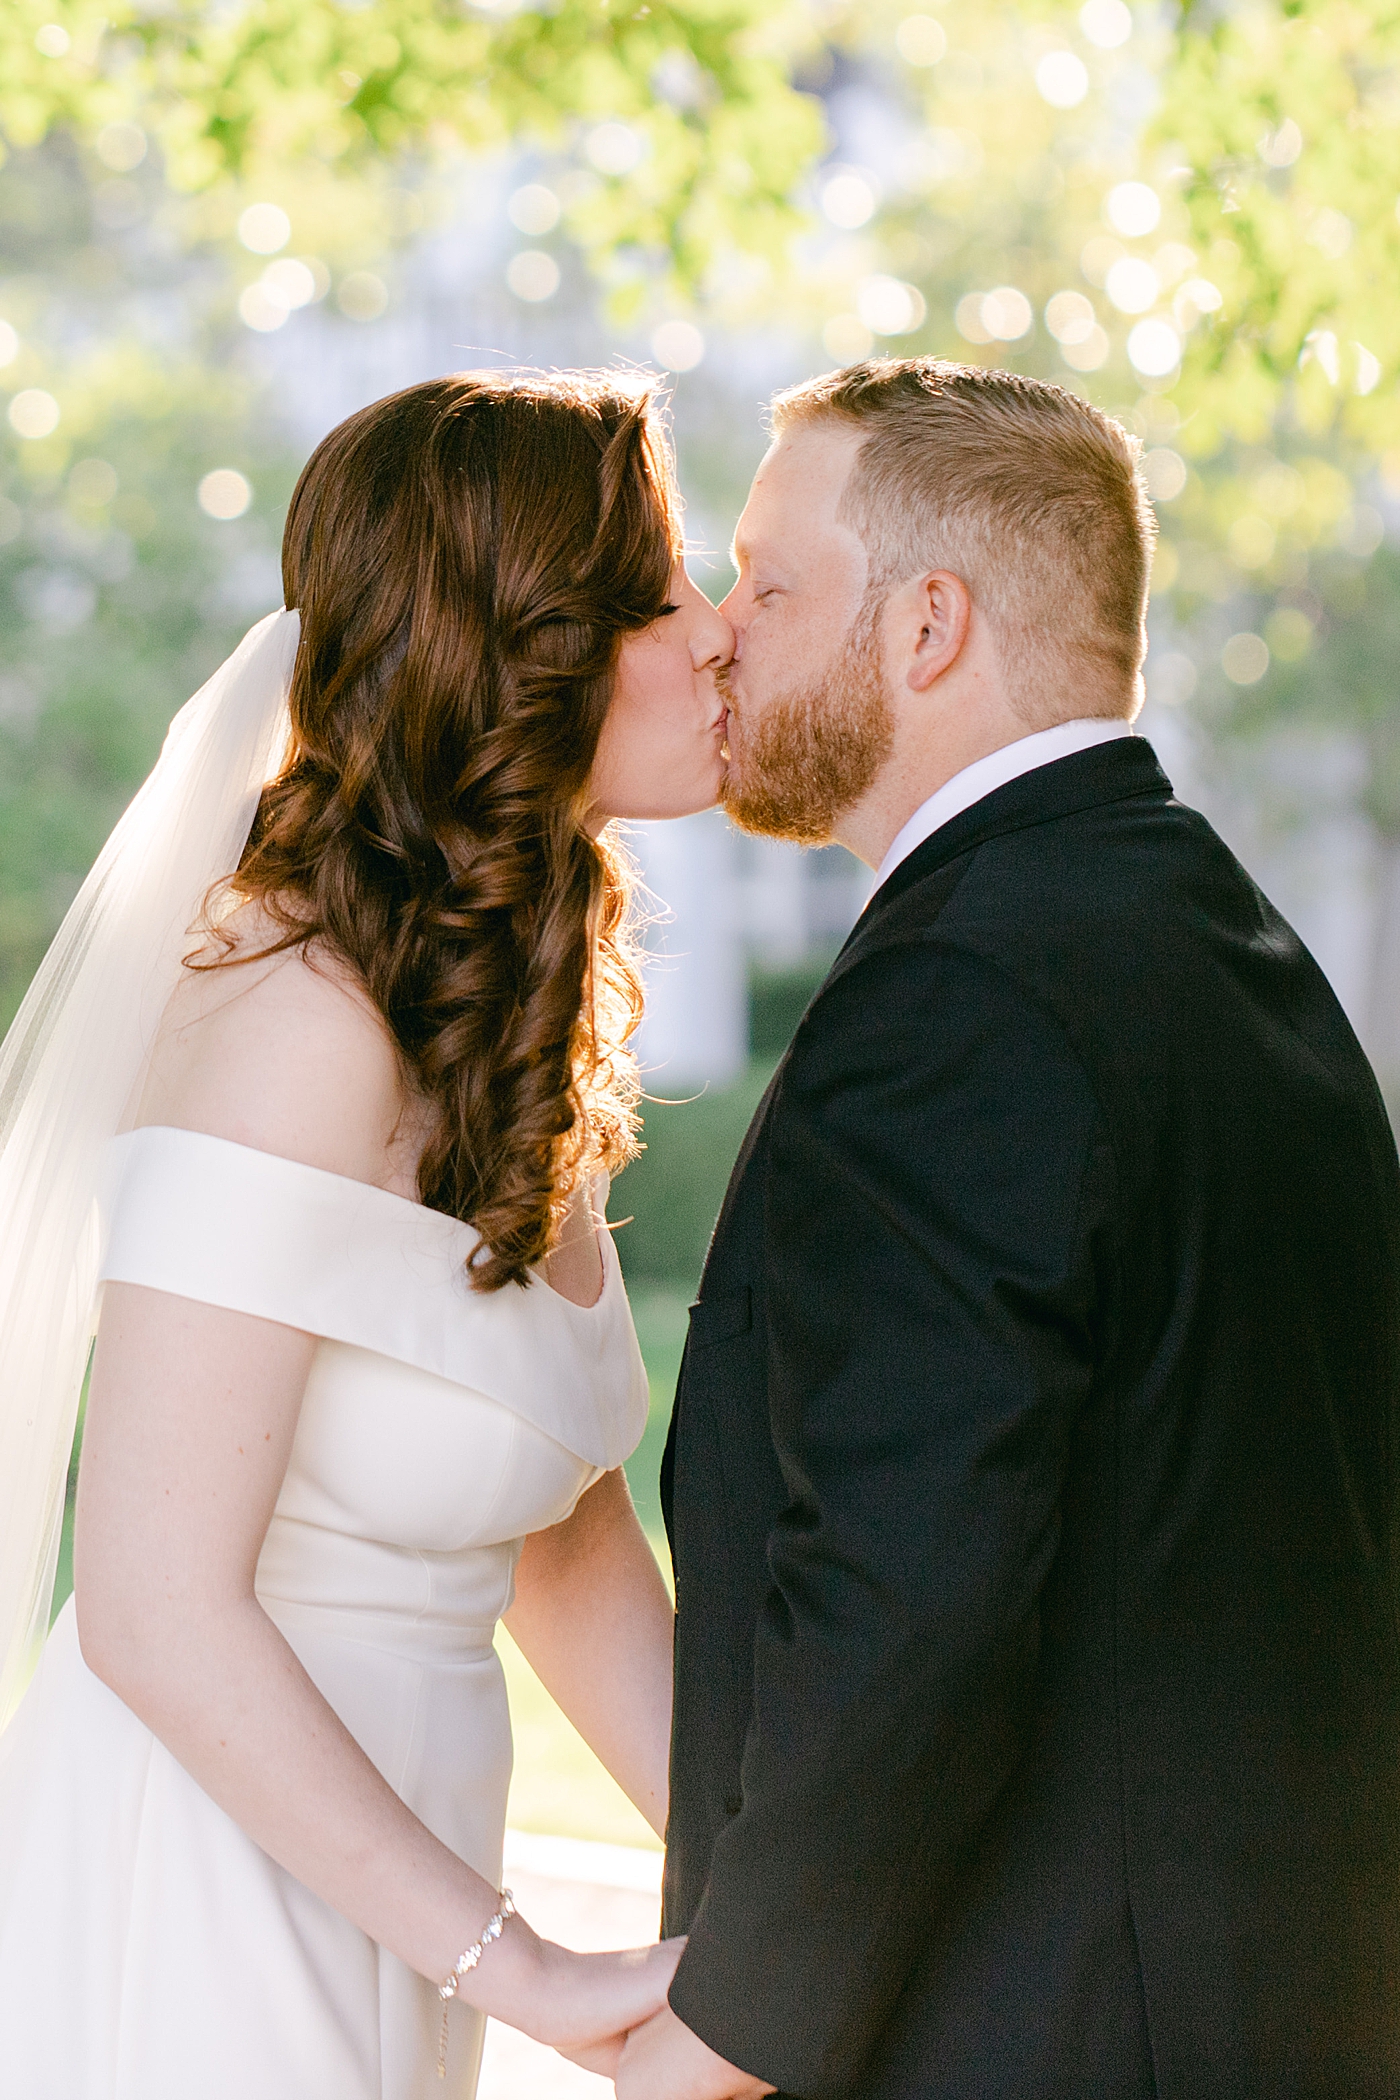 Bride and groom kissing after their Inn at perry cabin wedding | Photo by Hope Helmuth Photography